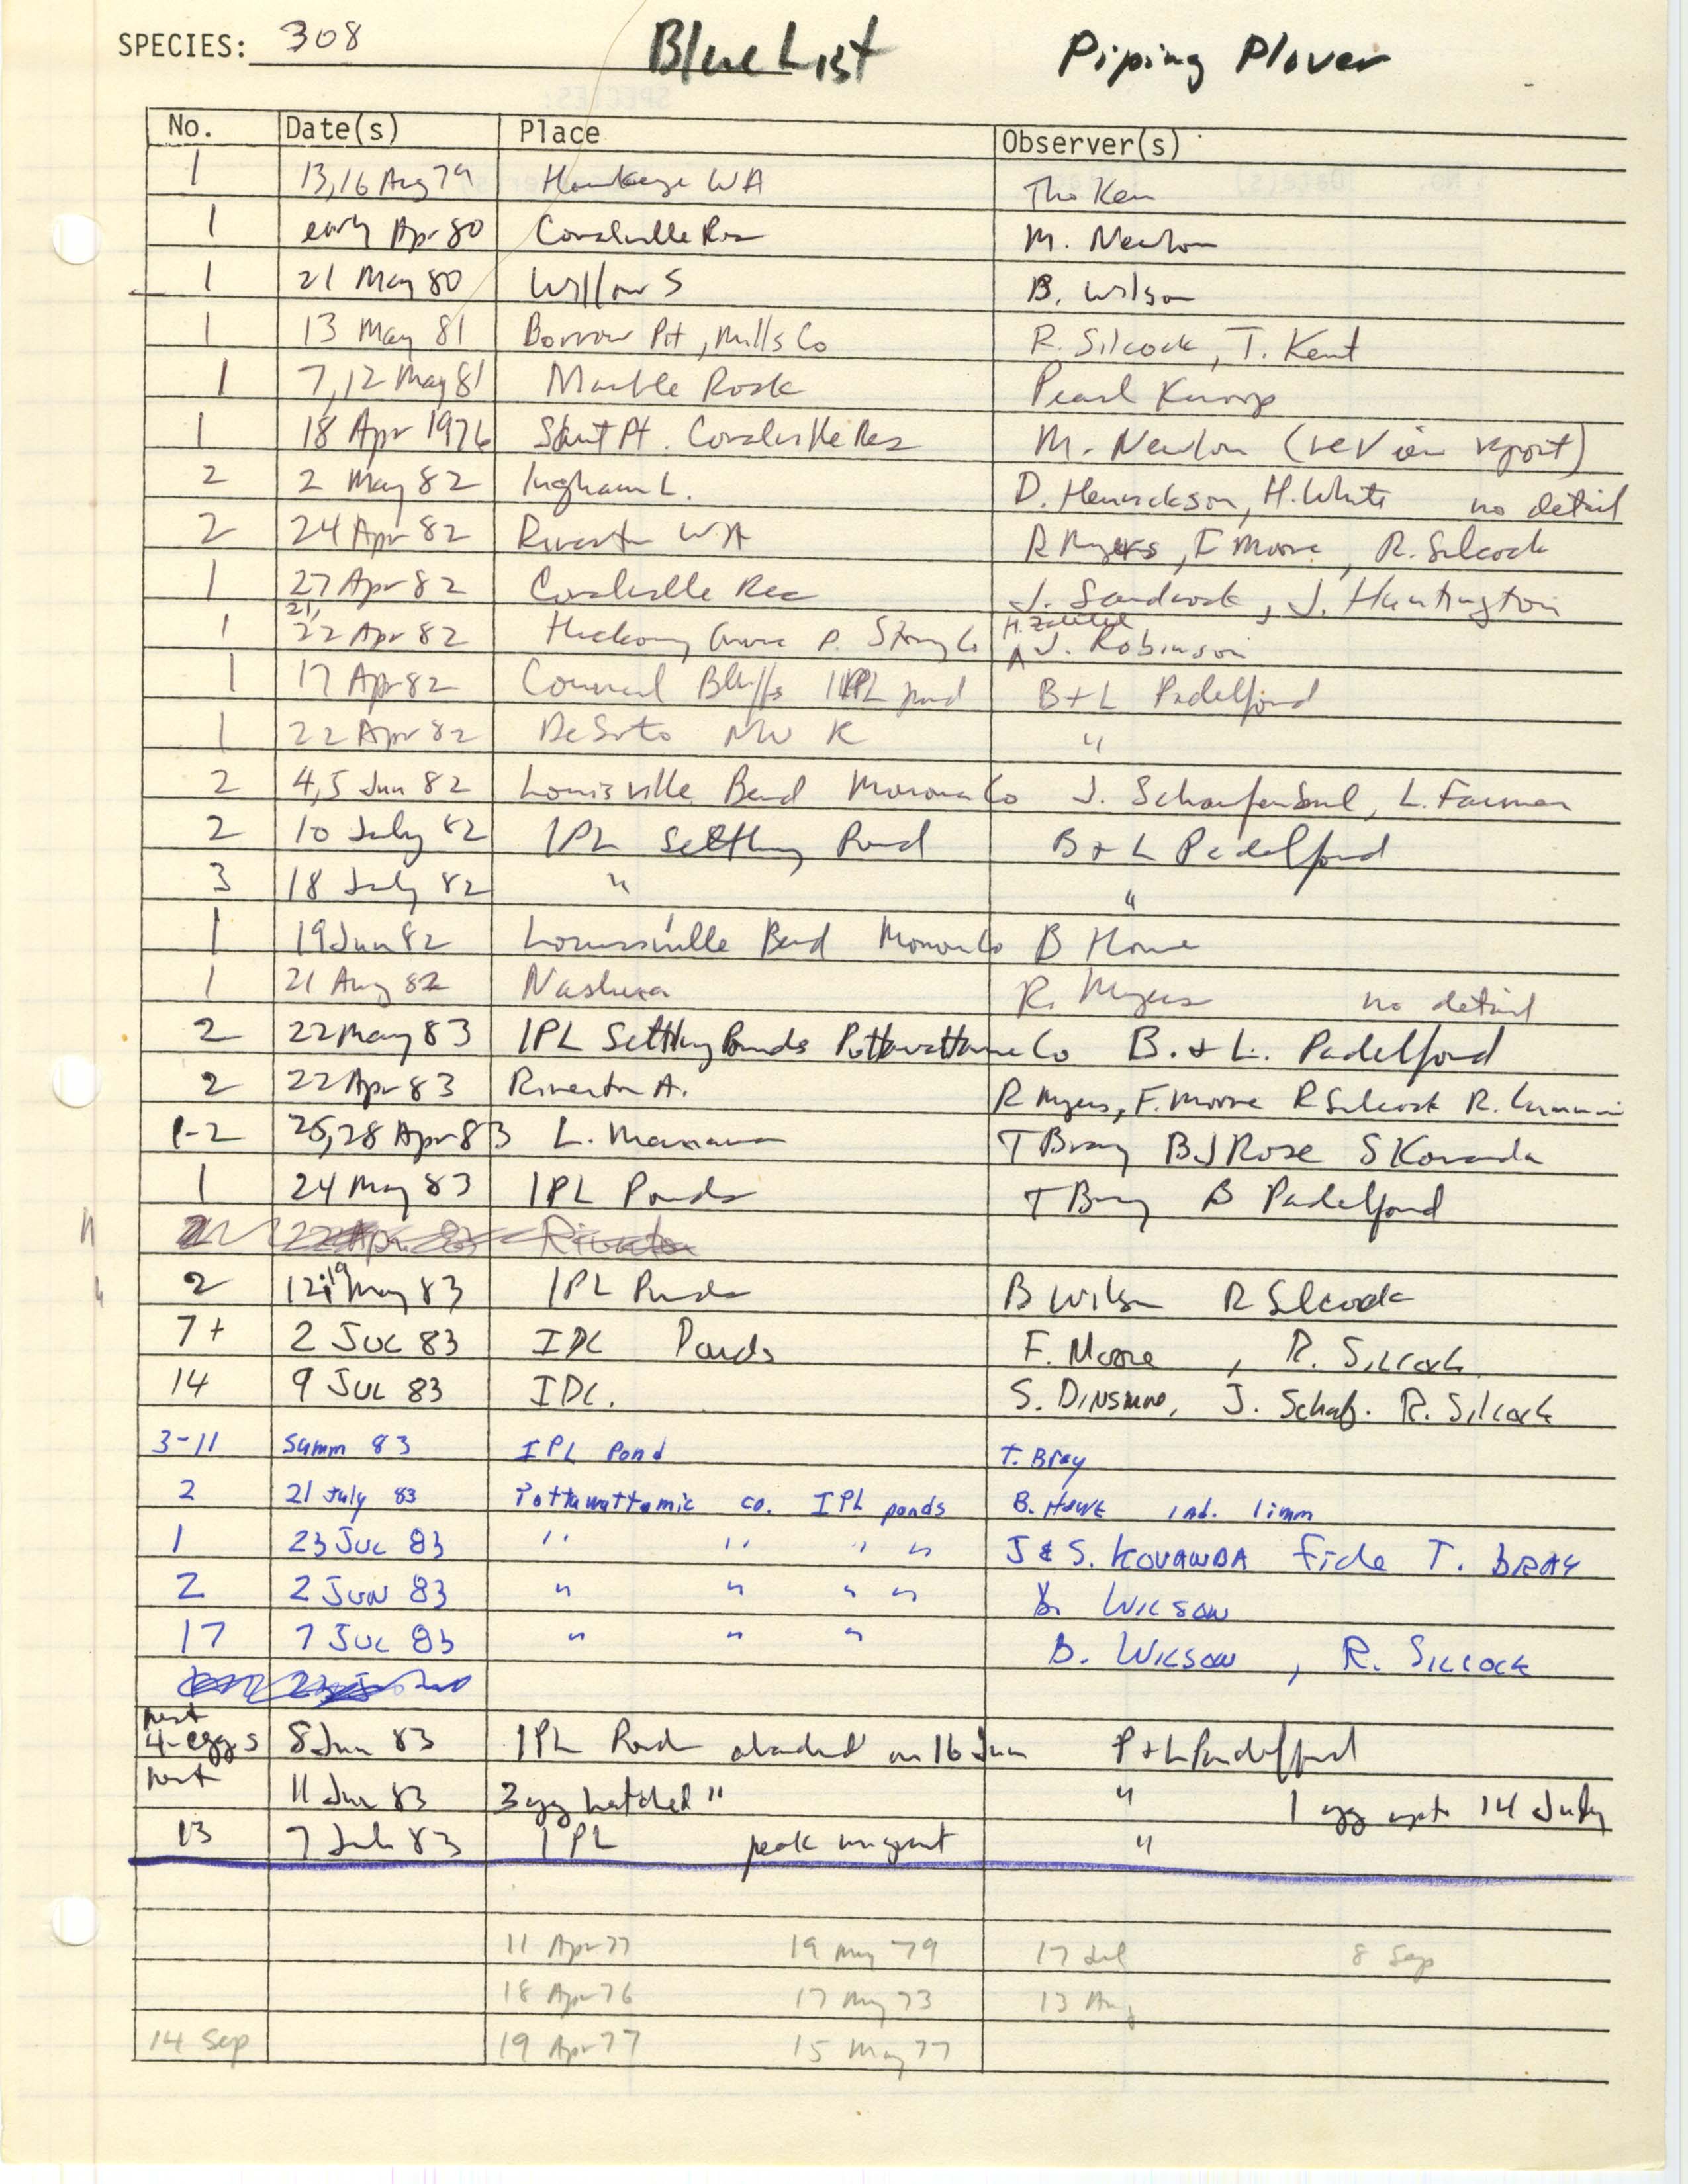 Iowa Ornithologists' Union, field report compiled data, Piping Plover, 1973-1983